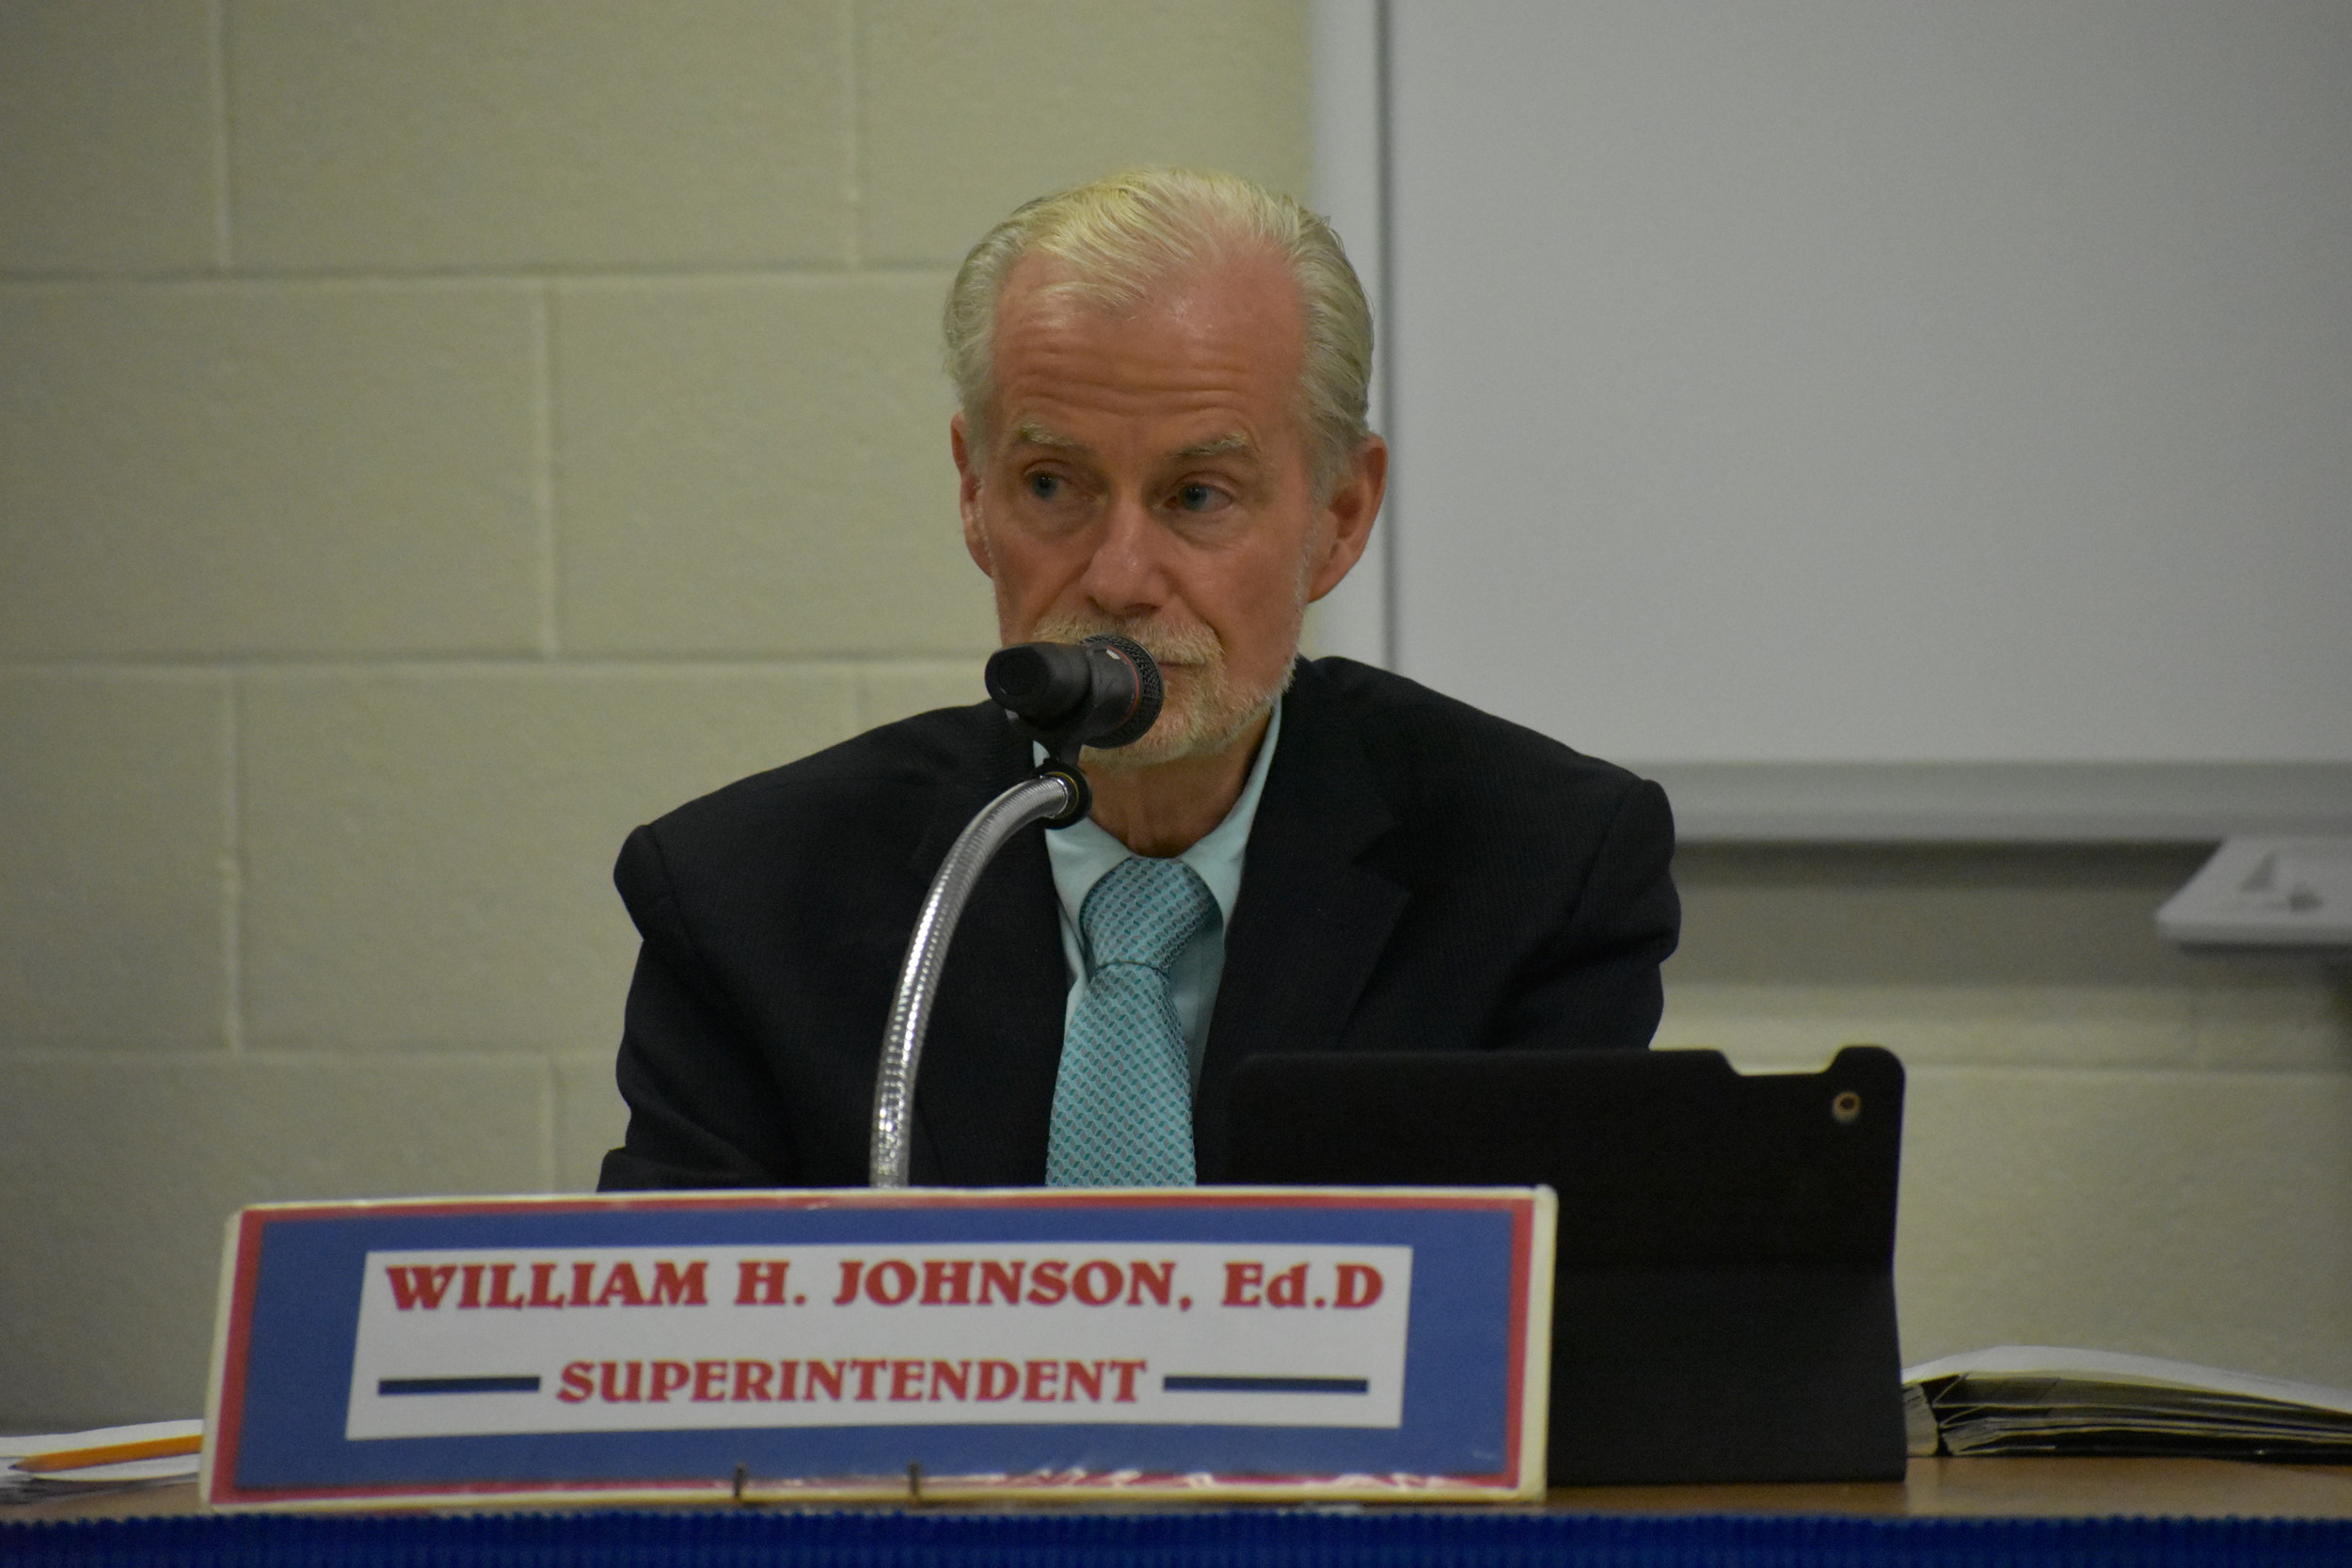 Rockville Centre Schools Superintendent Dr. William Johnson thanked the Board of Education for agreeing to extend his contract through 2020 at a meeting on Sept. 6.